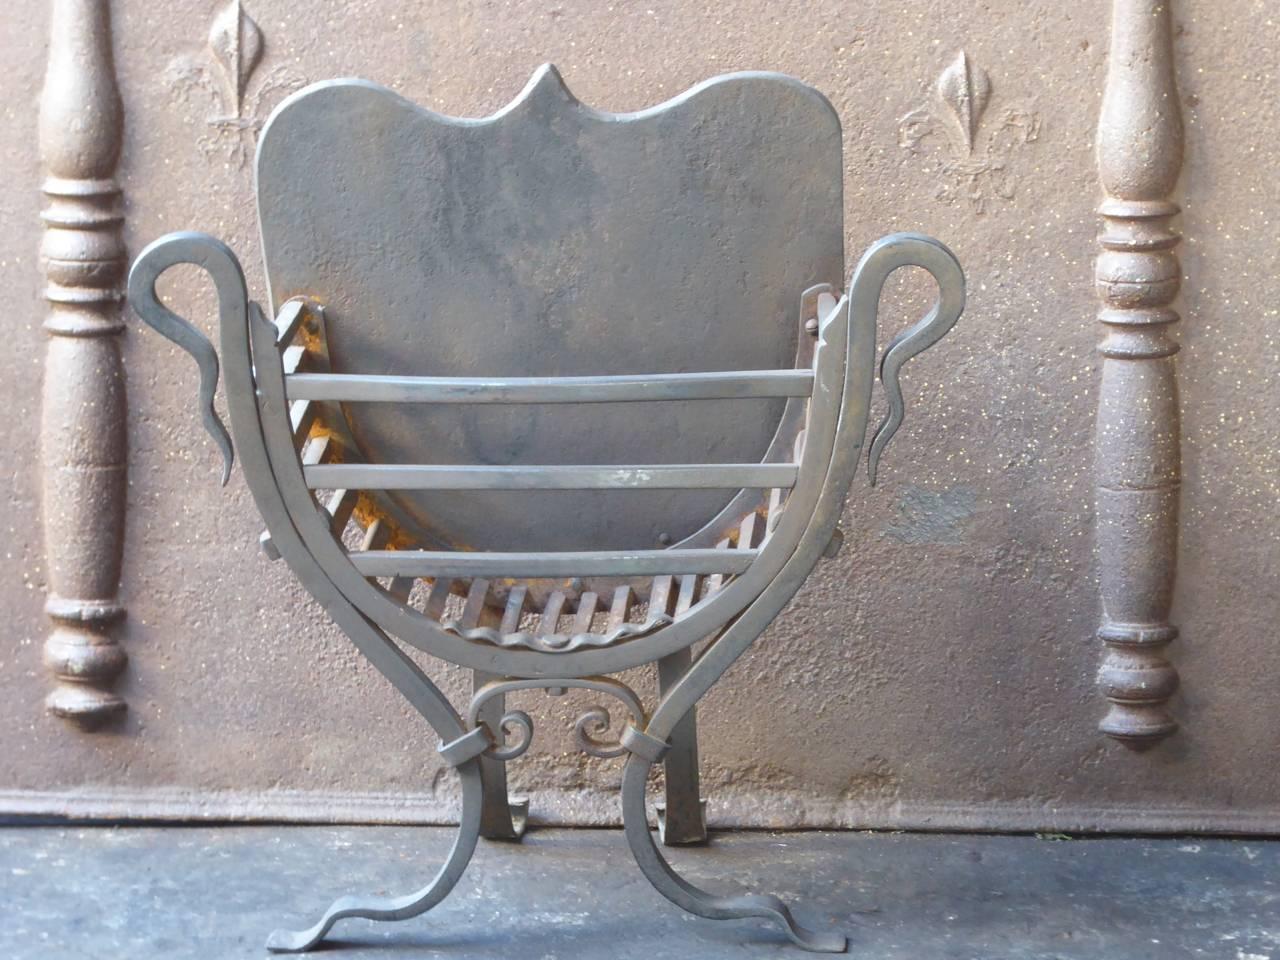 19th-20th century English Victorian fireplace basket, fire grate made of wrought iron. The total width of the front of the grate is 56 cm.

We have a unique and specialized collection of antique and used fireplace accessories consisting of more than